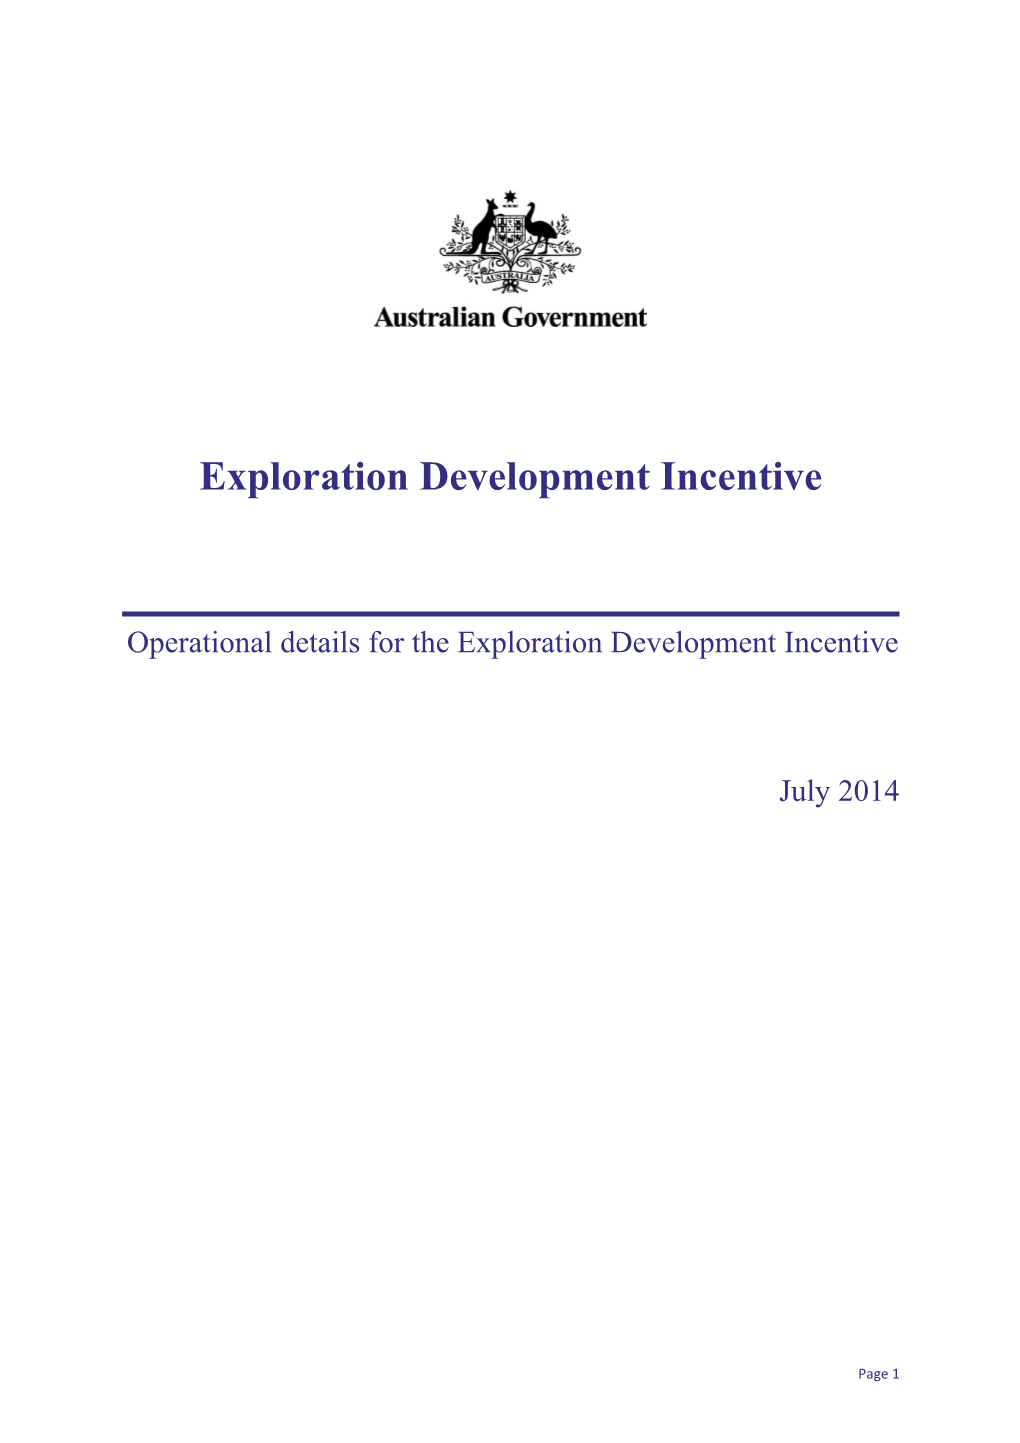 Operational Details for the Exploration Development Incentive